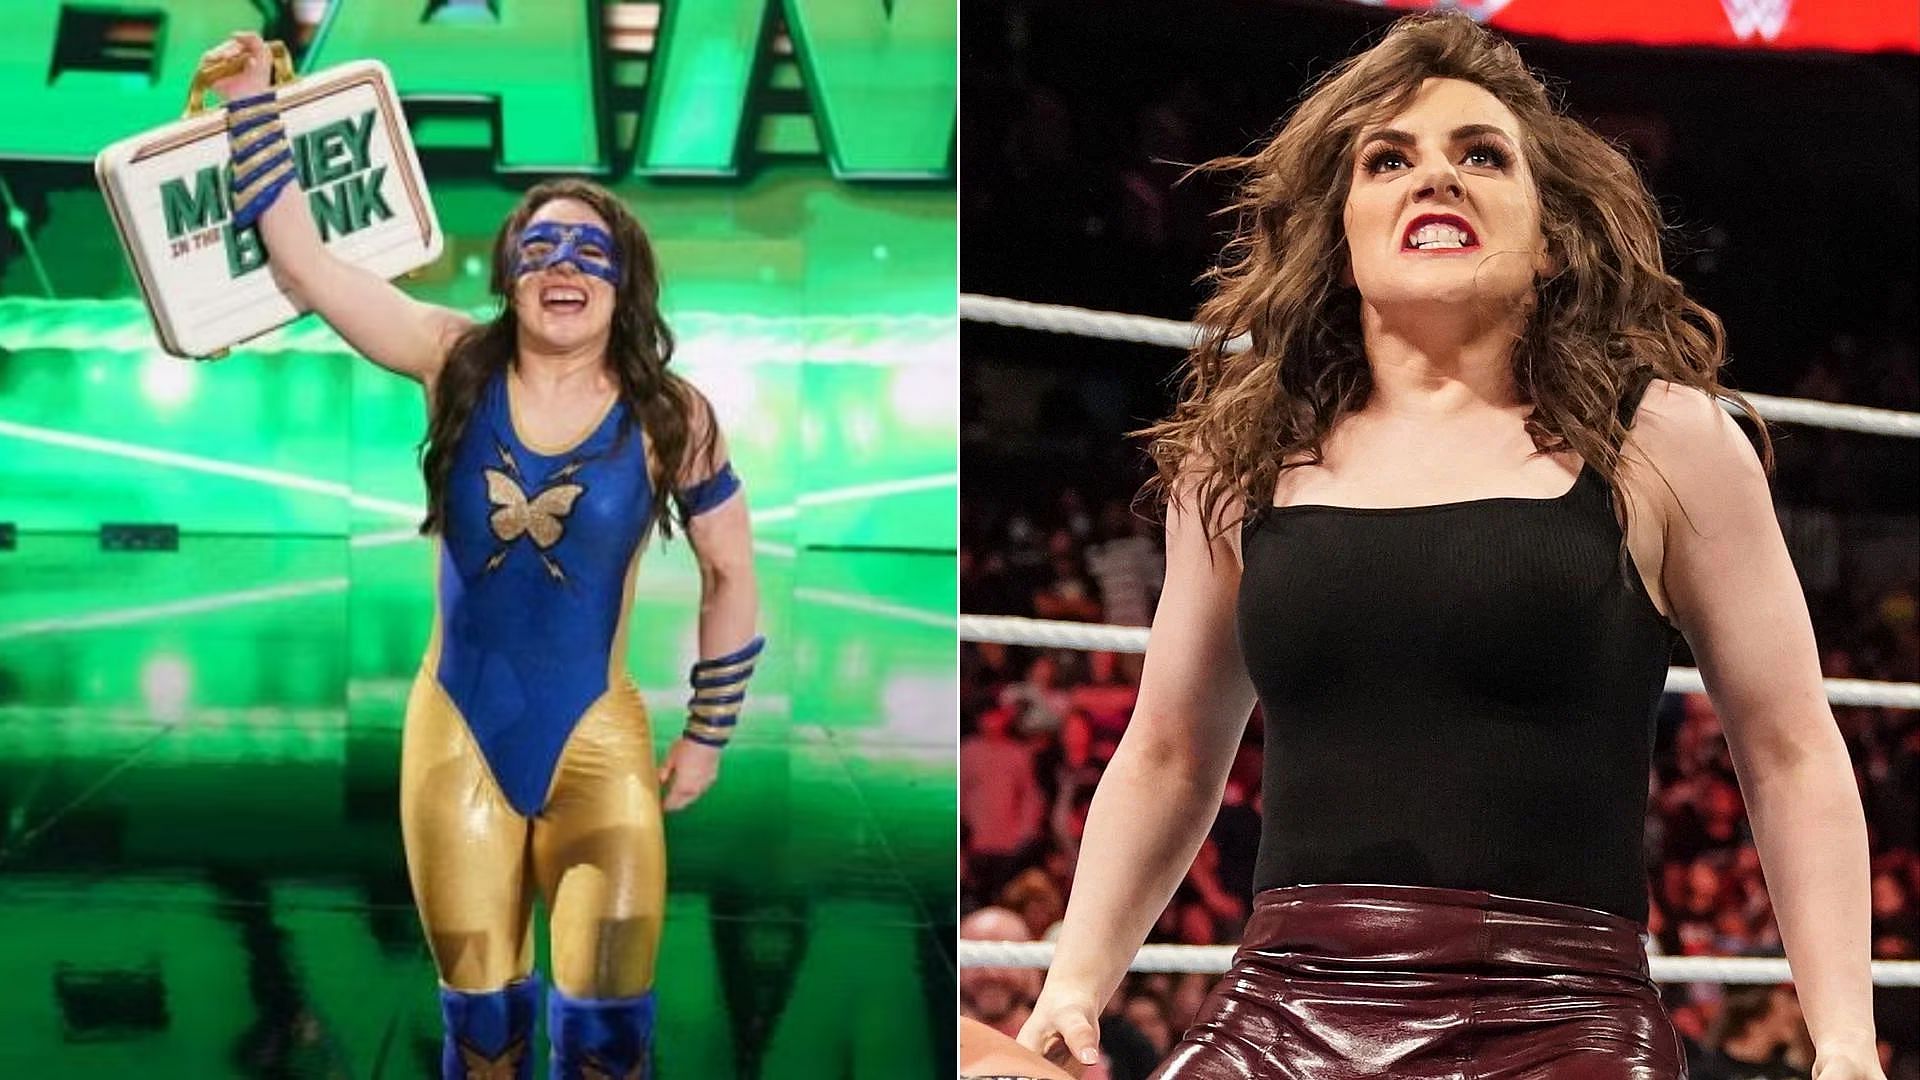 Nikki Cross reverted to her previous gimmick upon return to RAW in October 2022